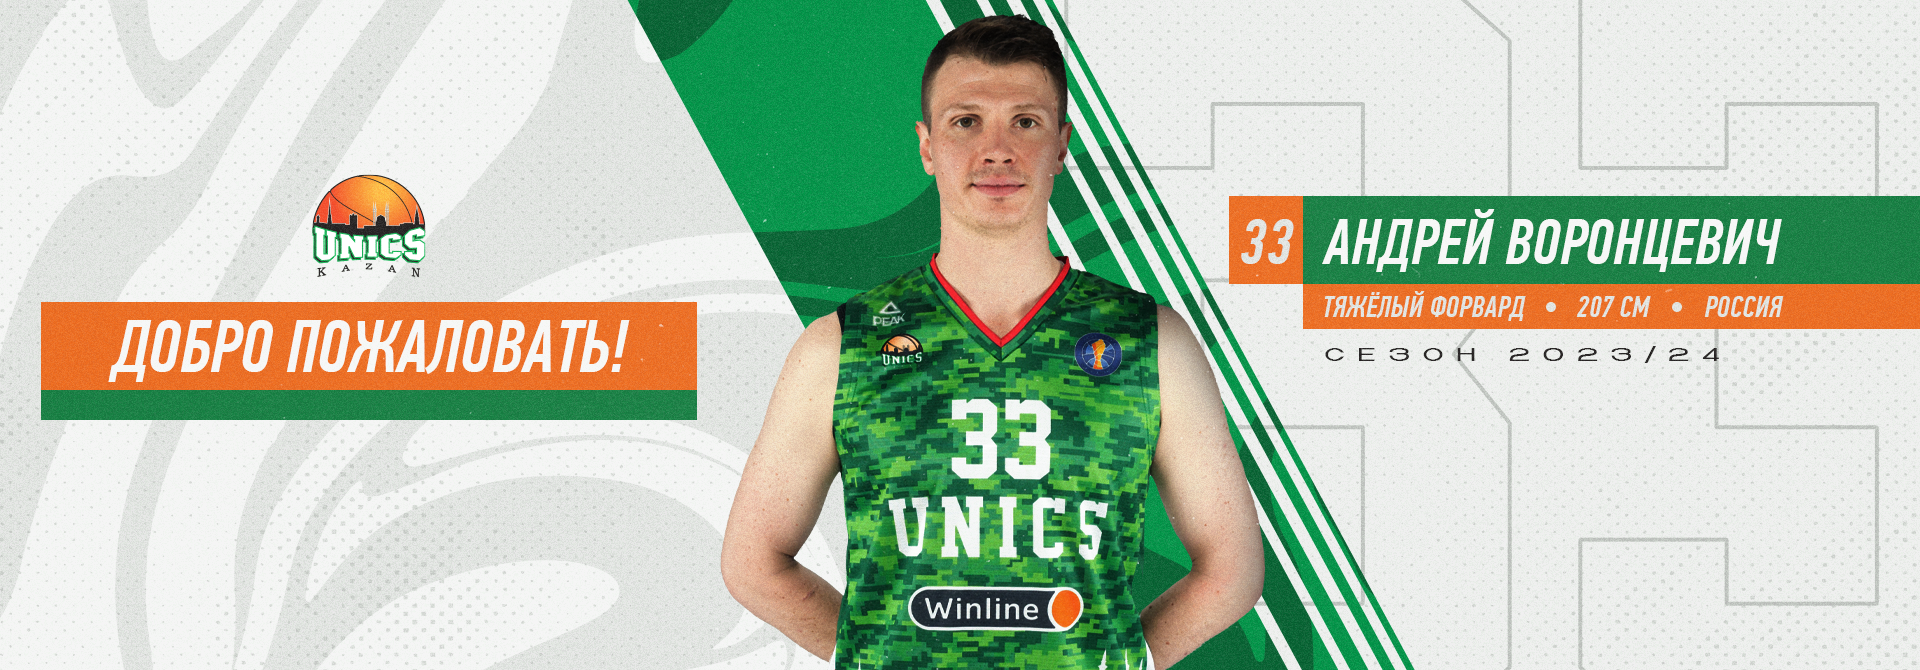 Andrey Vorontsevich is returning to UNICS!